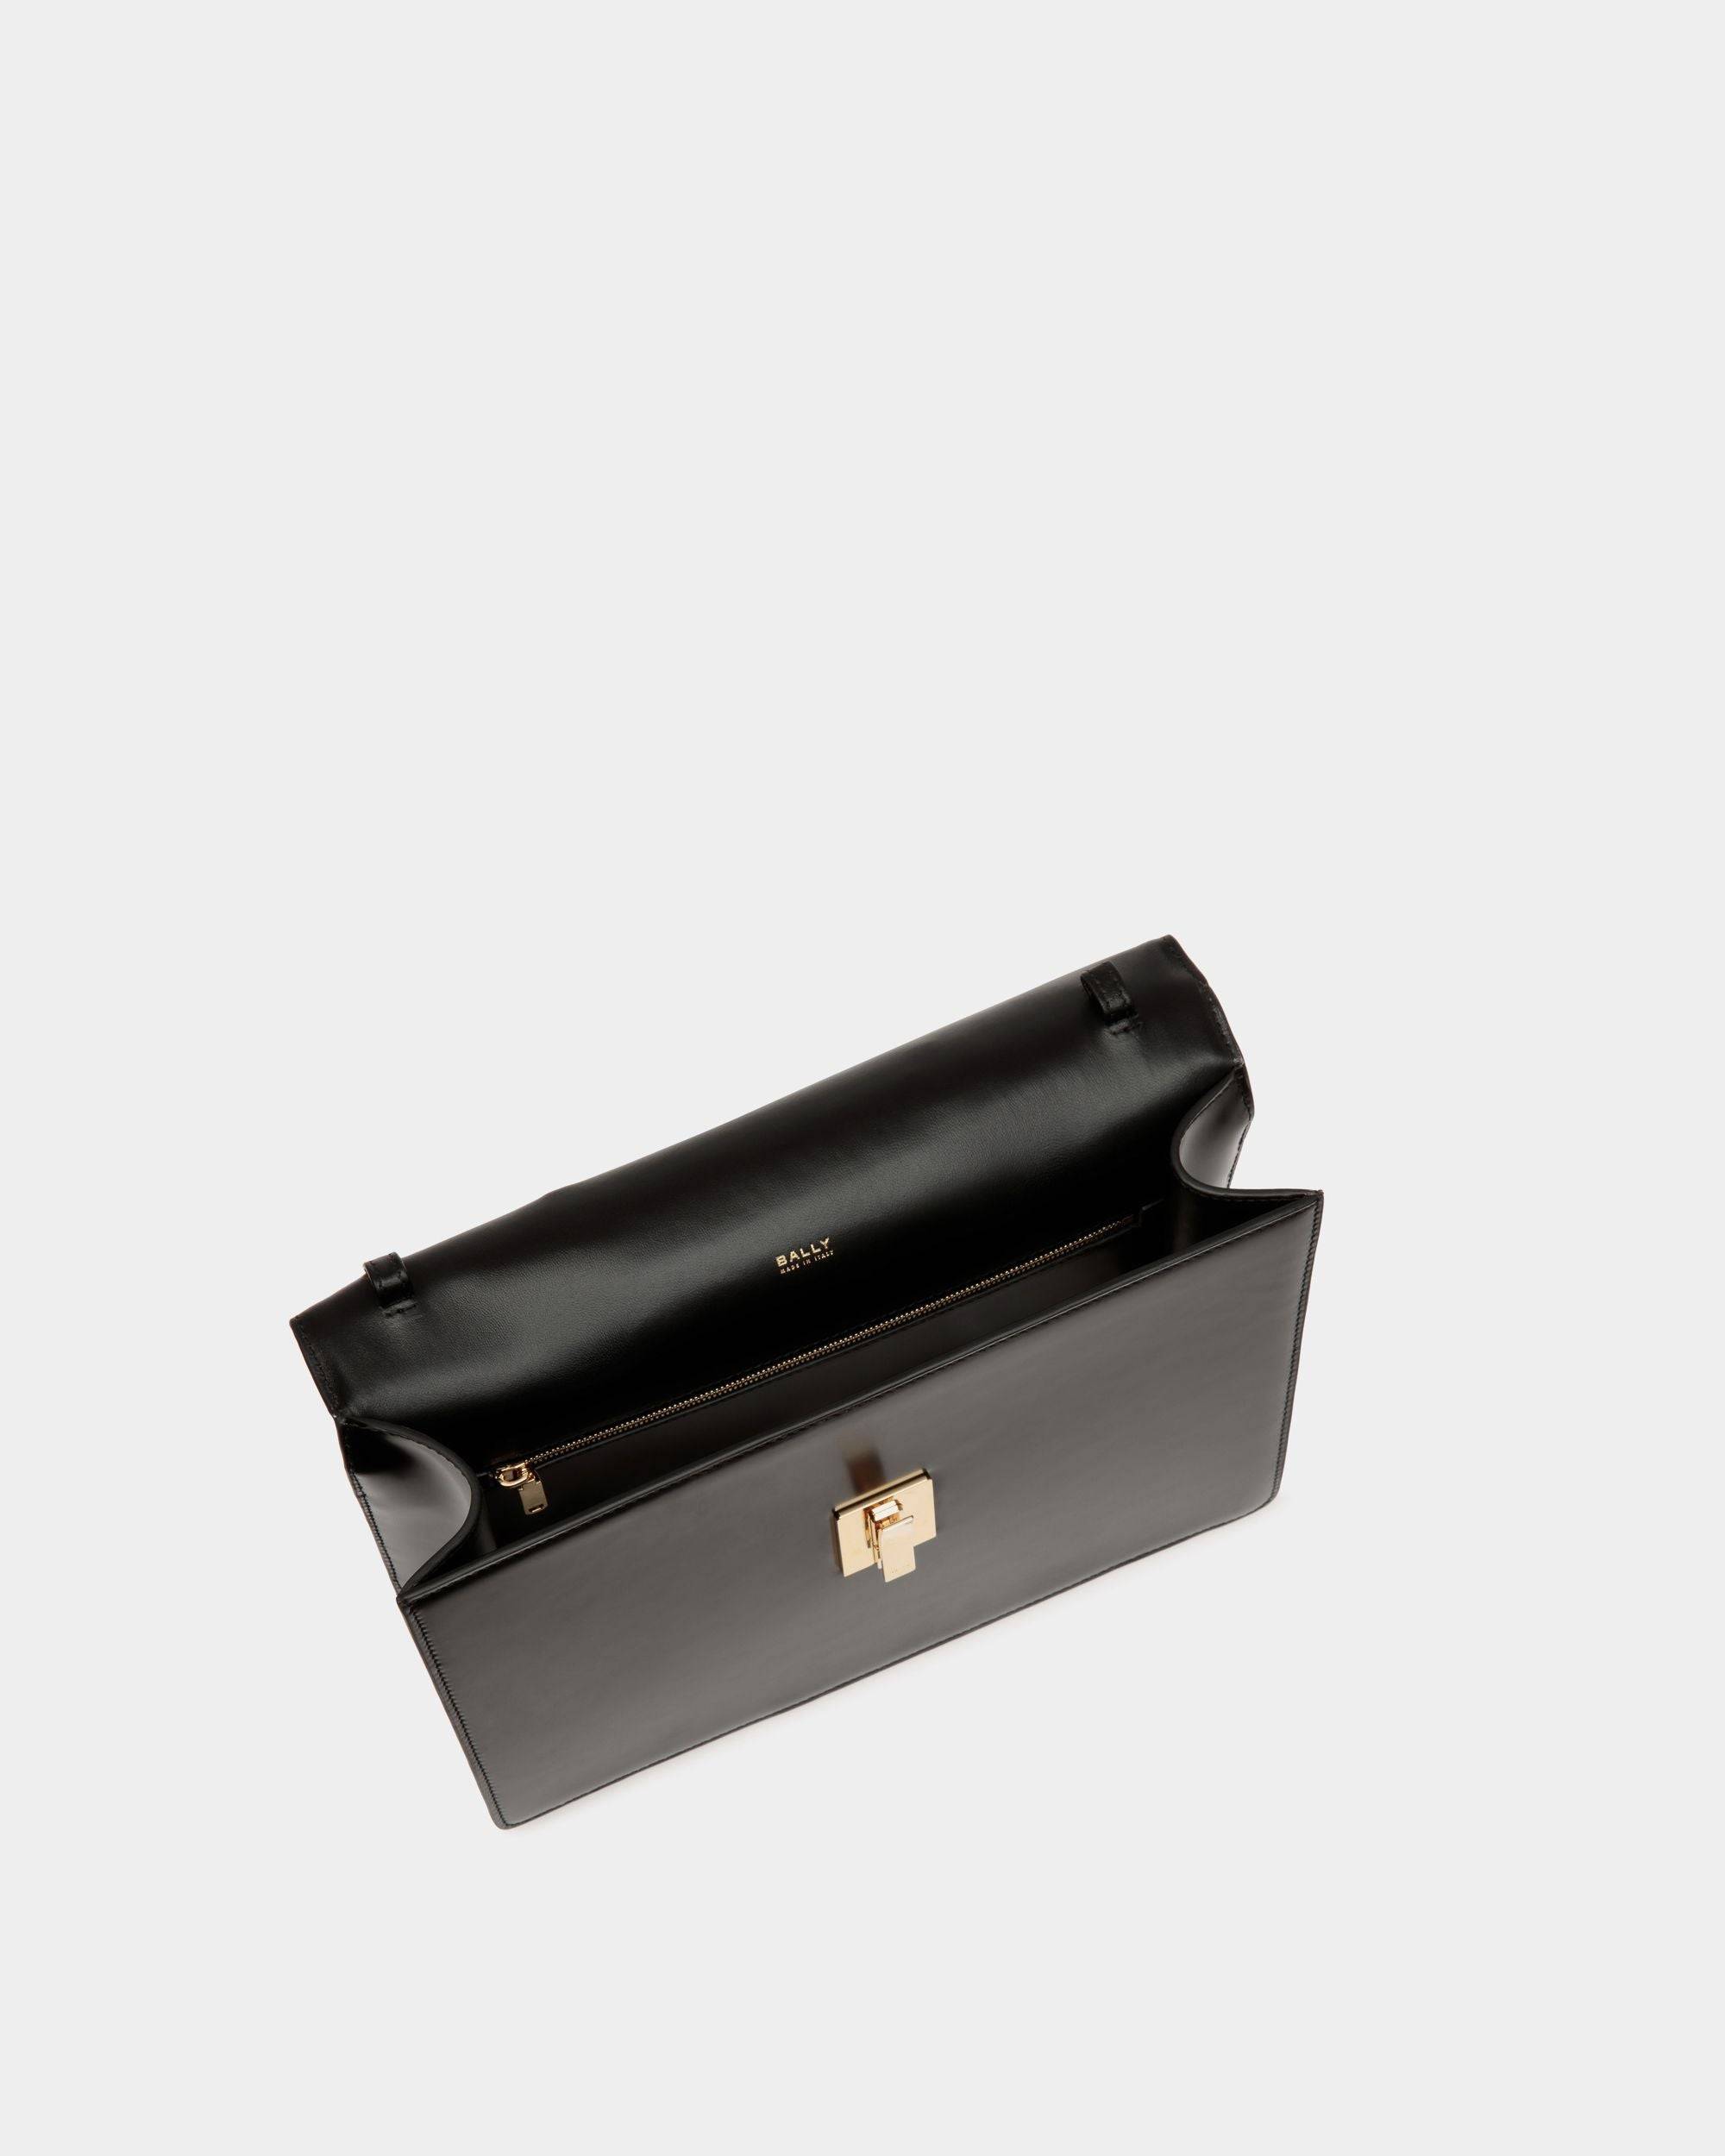 Ollam | Women's Top Handle Bag in Black Brushed Leather | Bally | Still Life Open / Inside